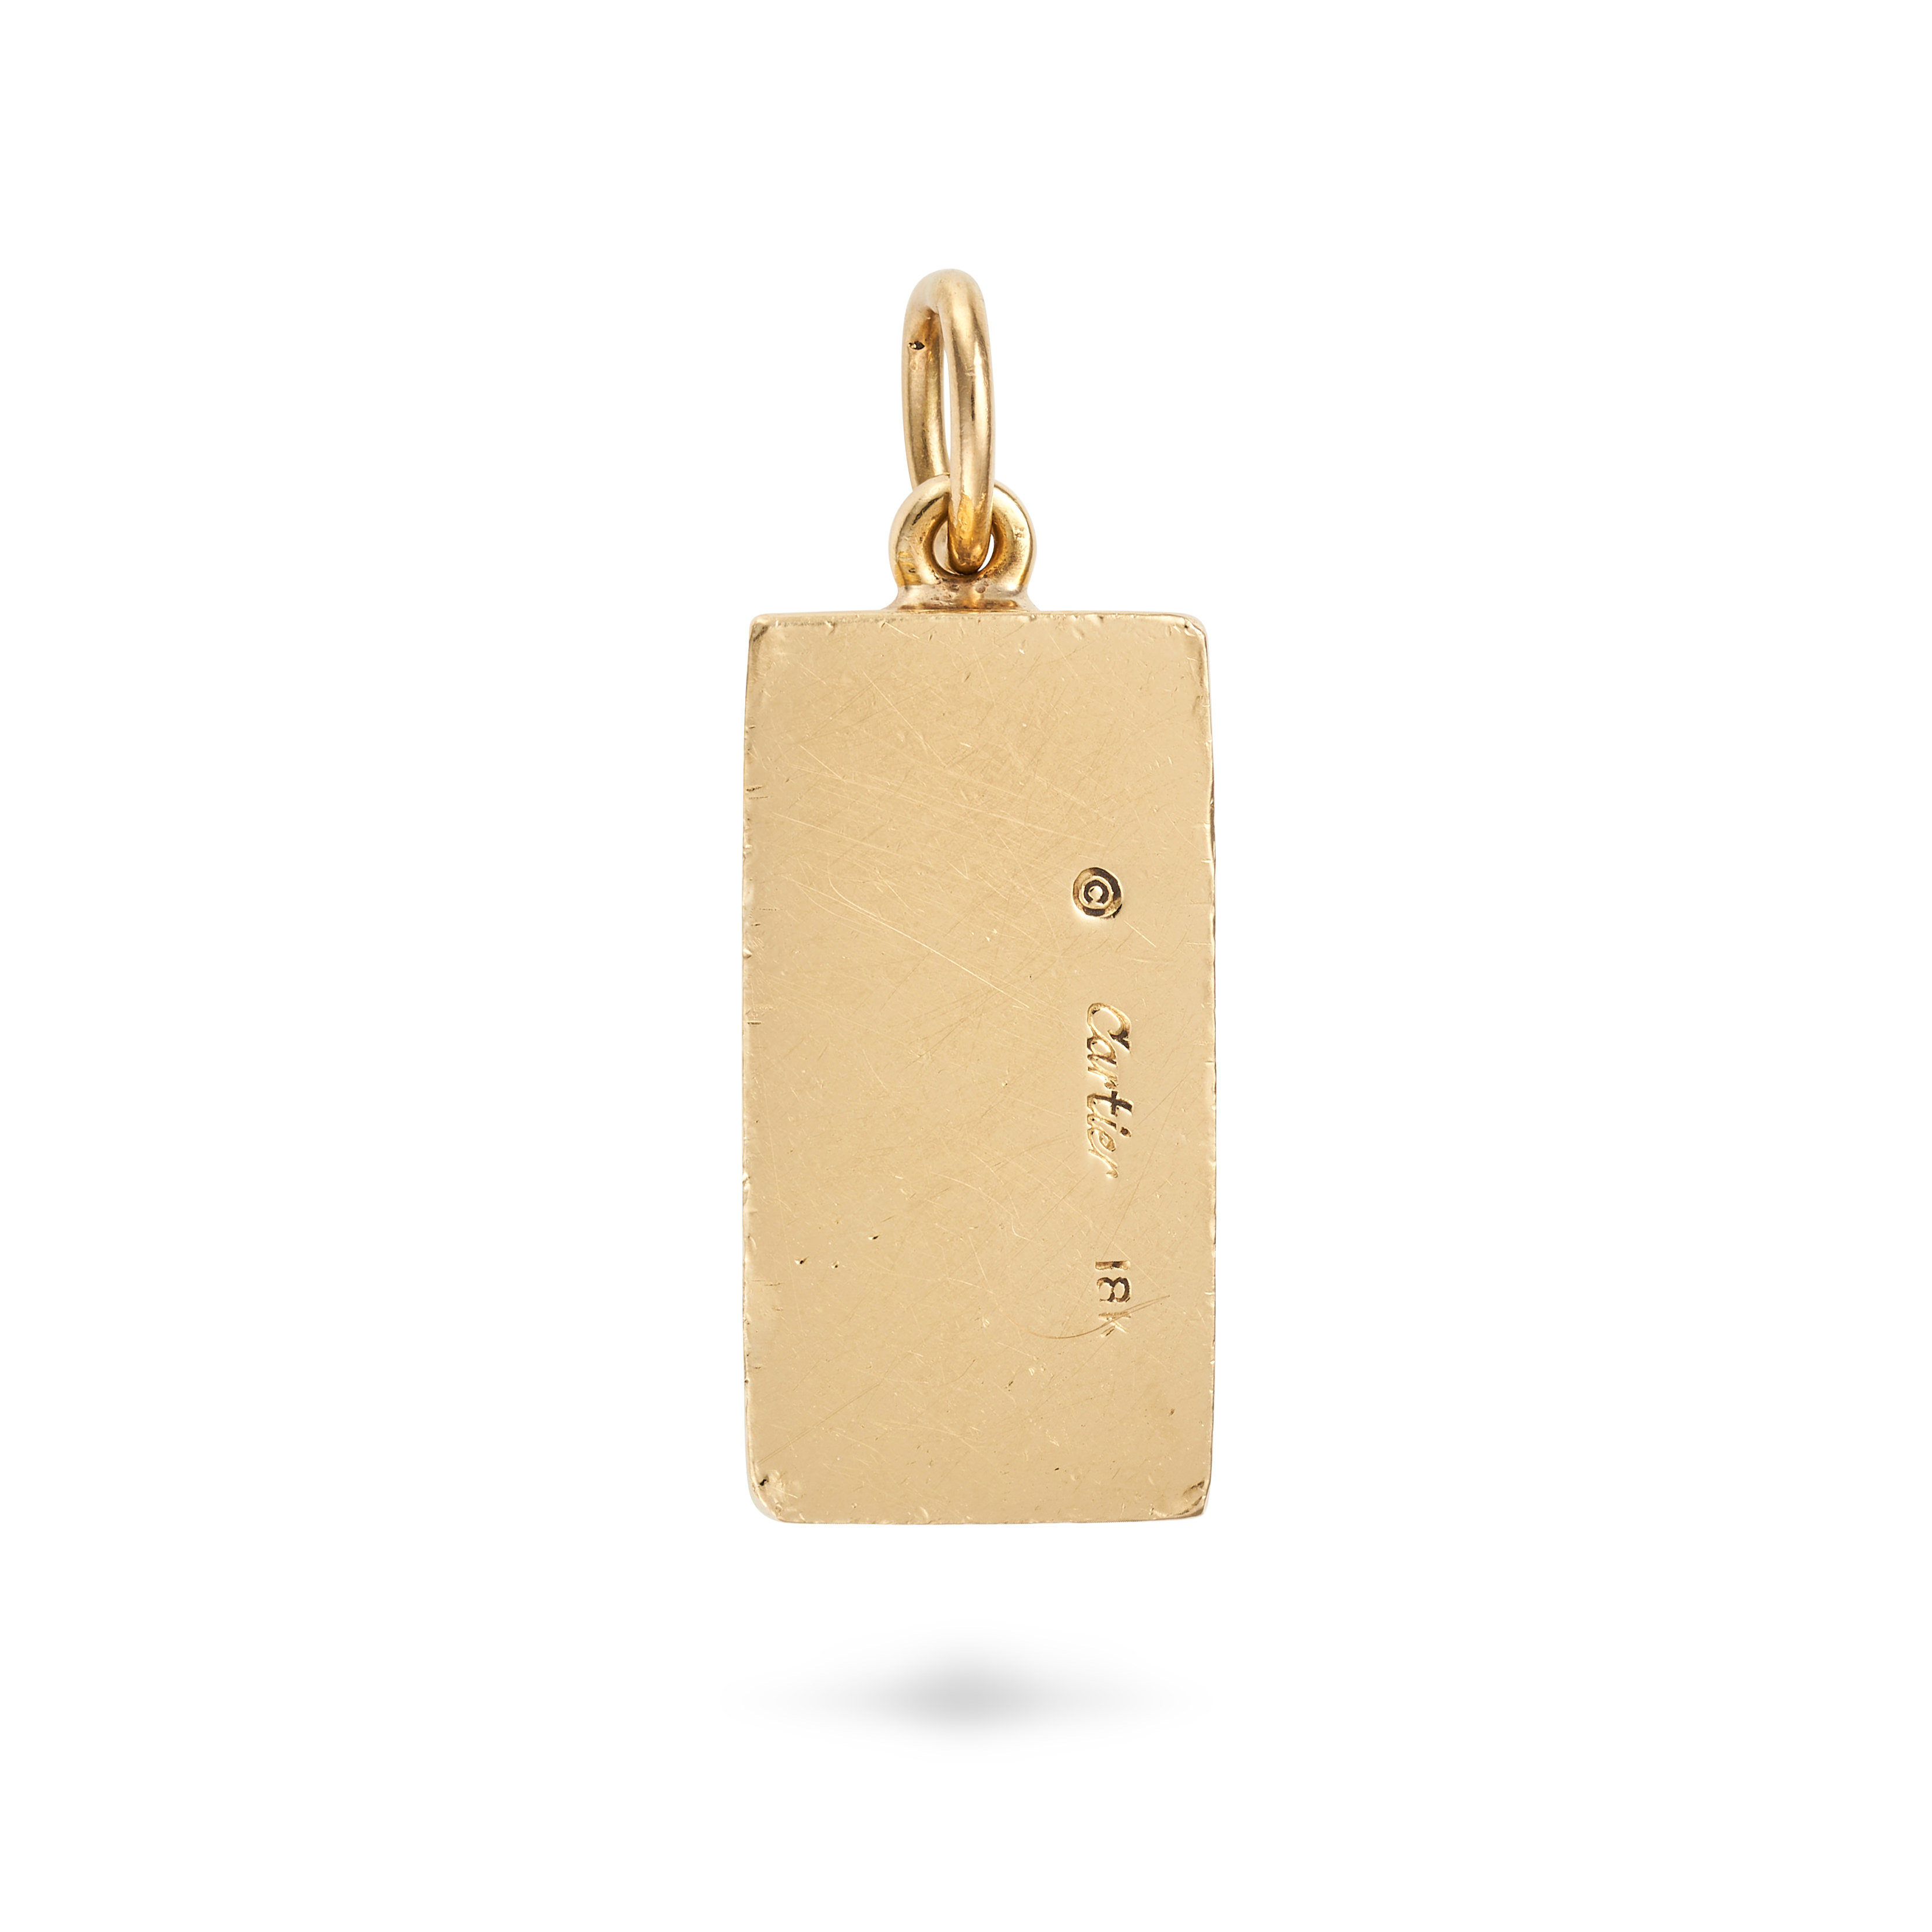 CARTIER, A 1 OUNCE GOLD INGOT PENDANT in 18ct yellow gold, designed as a gold bar, engraved CARTI... - Image 2 of 2